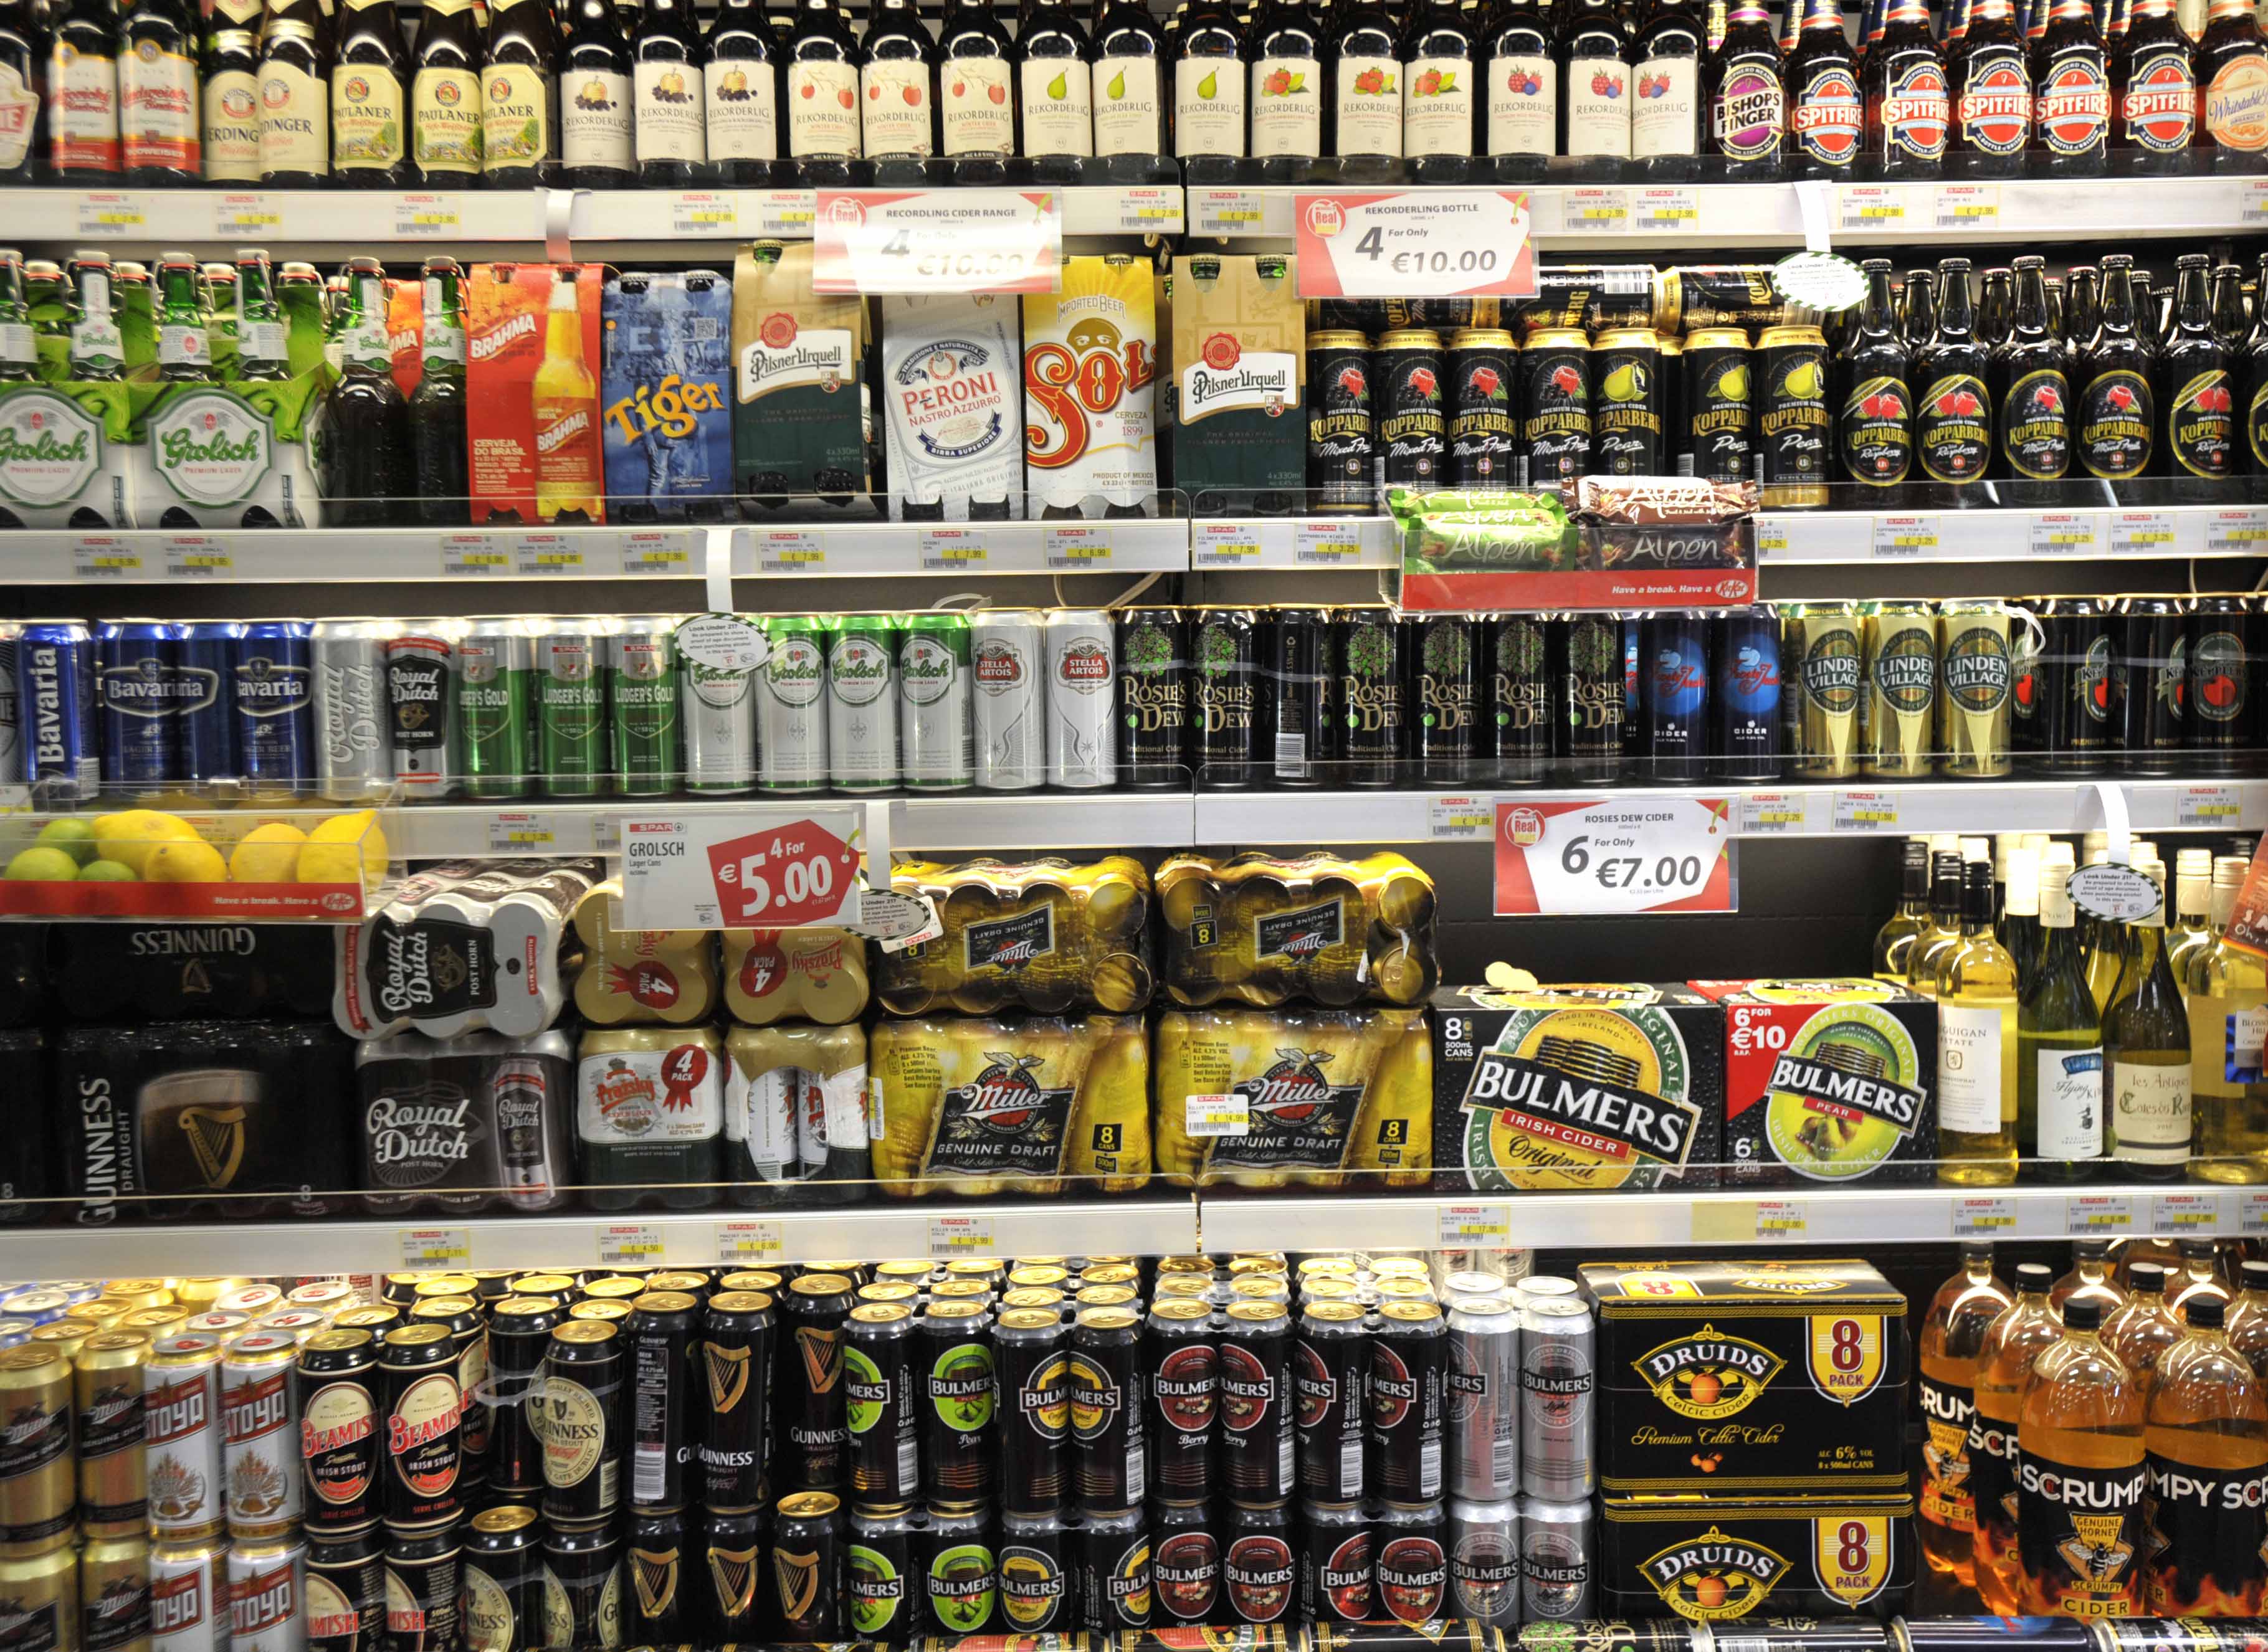 “It’s important to remember that MUP will not impact the vast majority of alcohol products” – NOffLA.